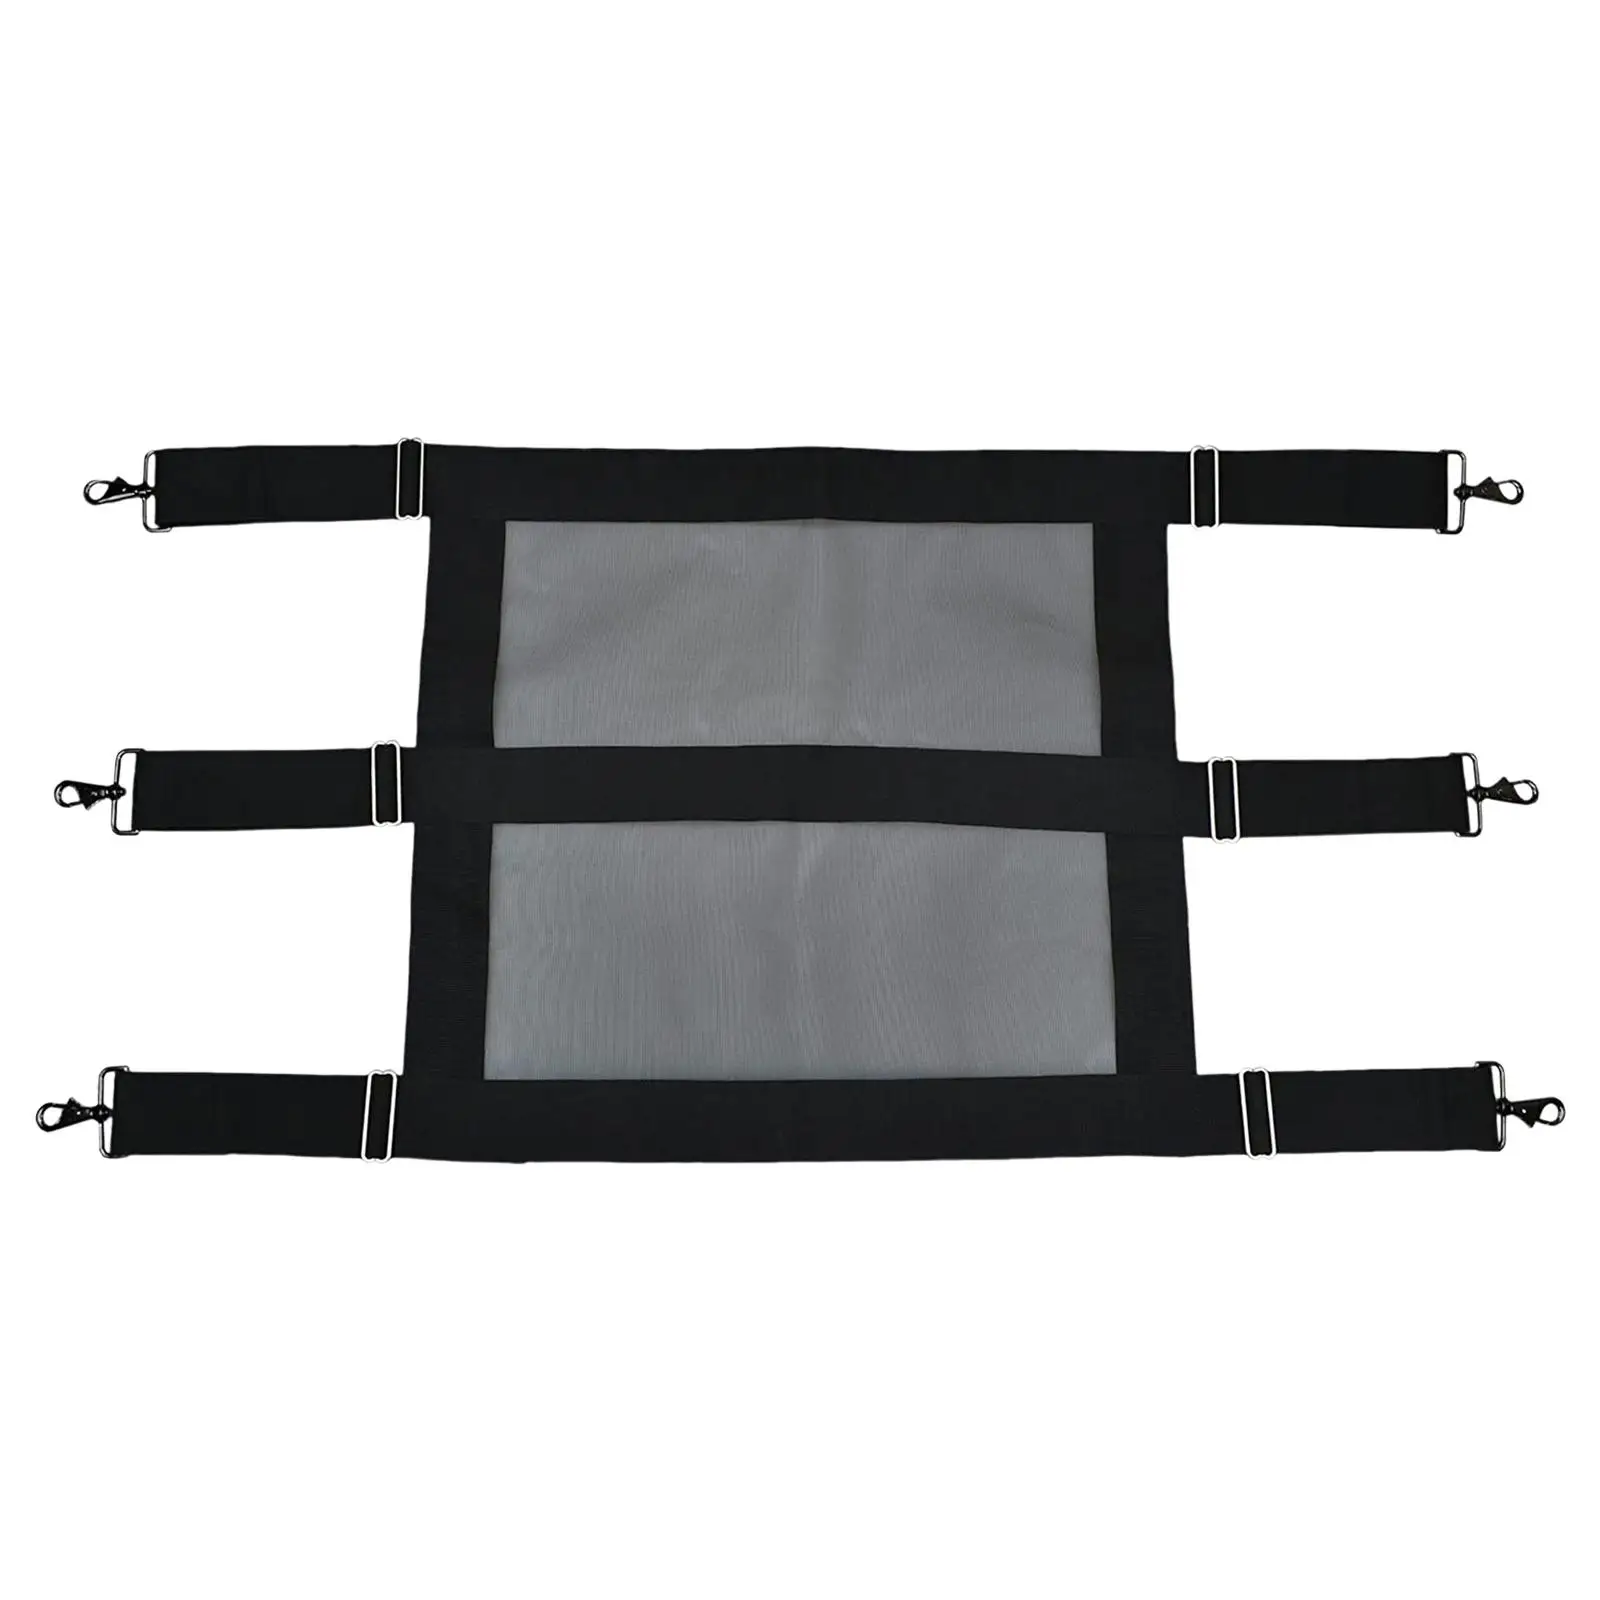 Horse Aisle Stall Guard Aisle Guard for Horses Black and Hardware Allows Air